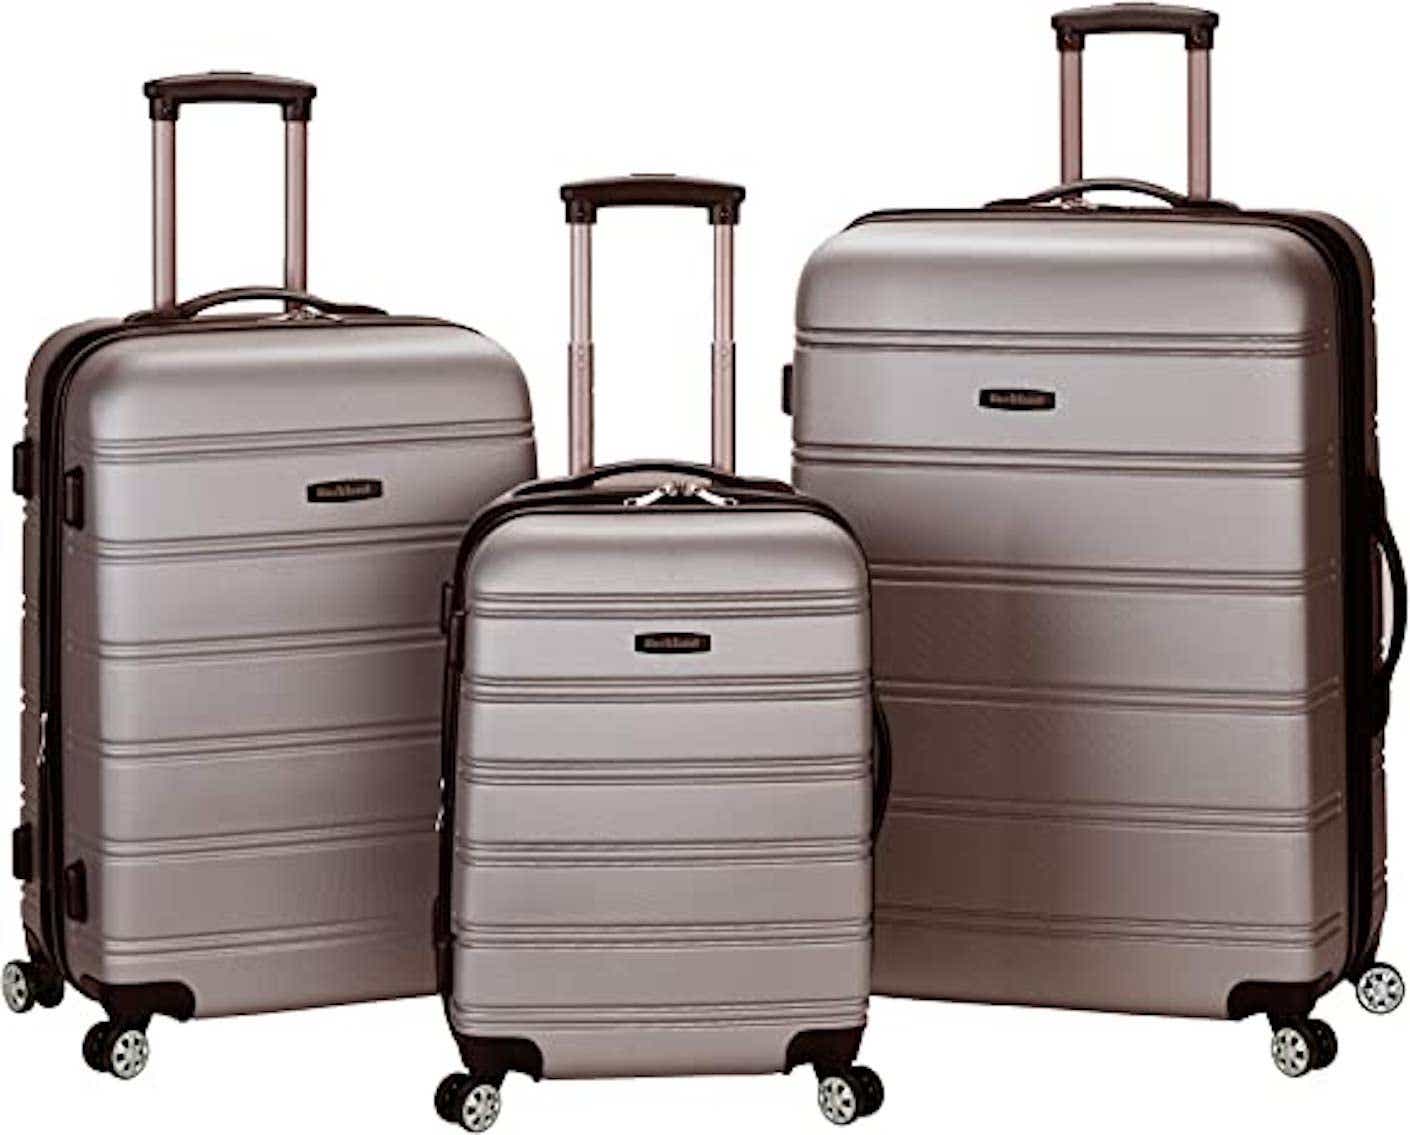 Three hard suitcases of different sizes against a white background.